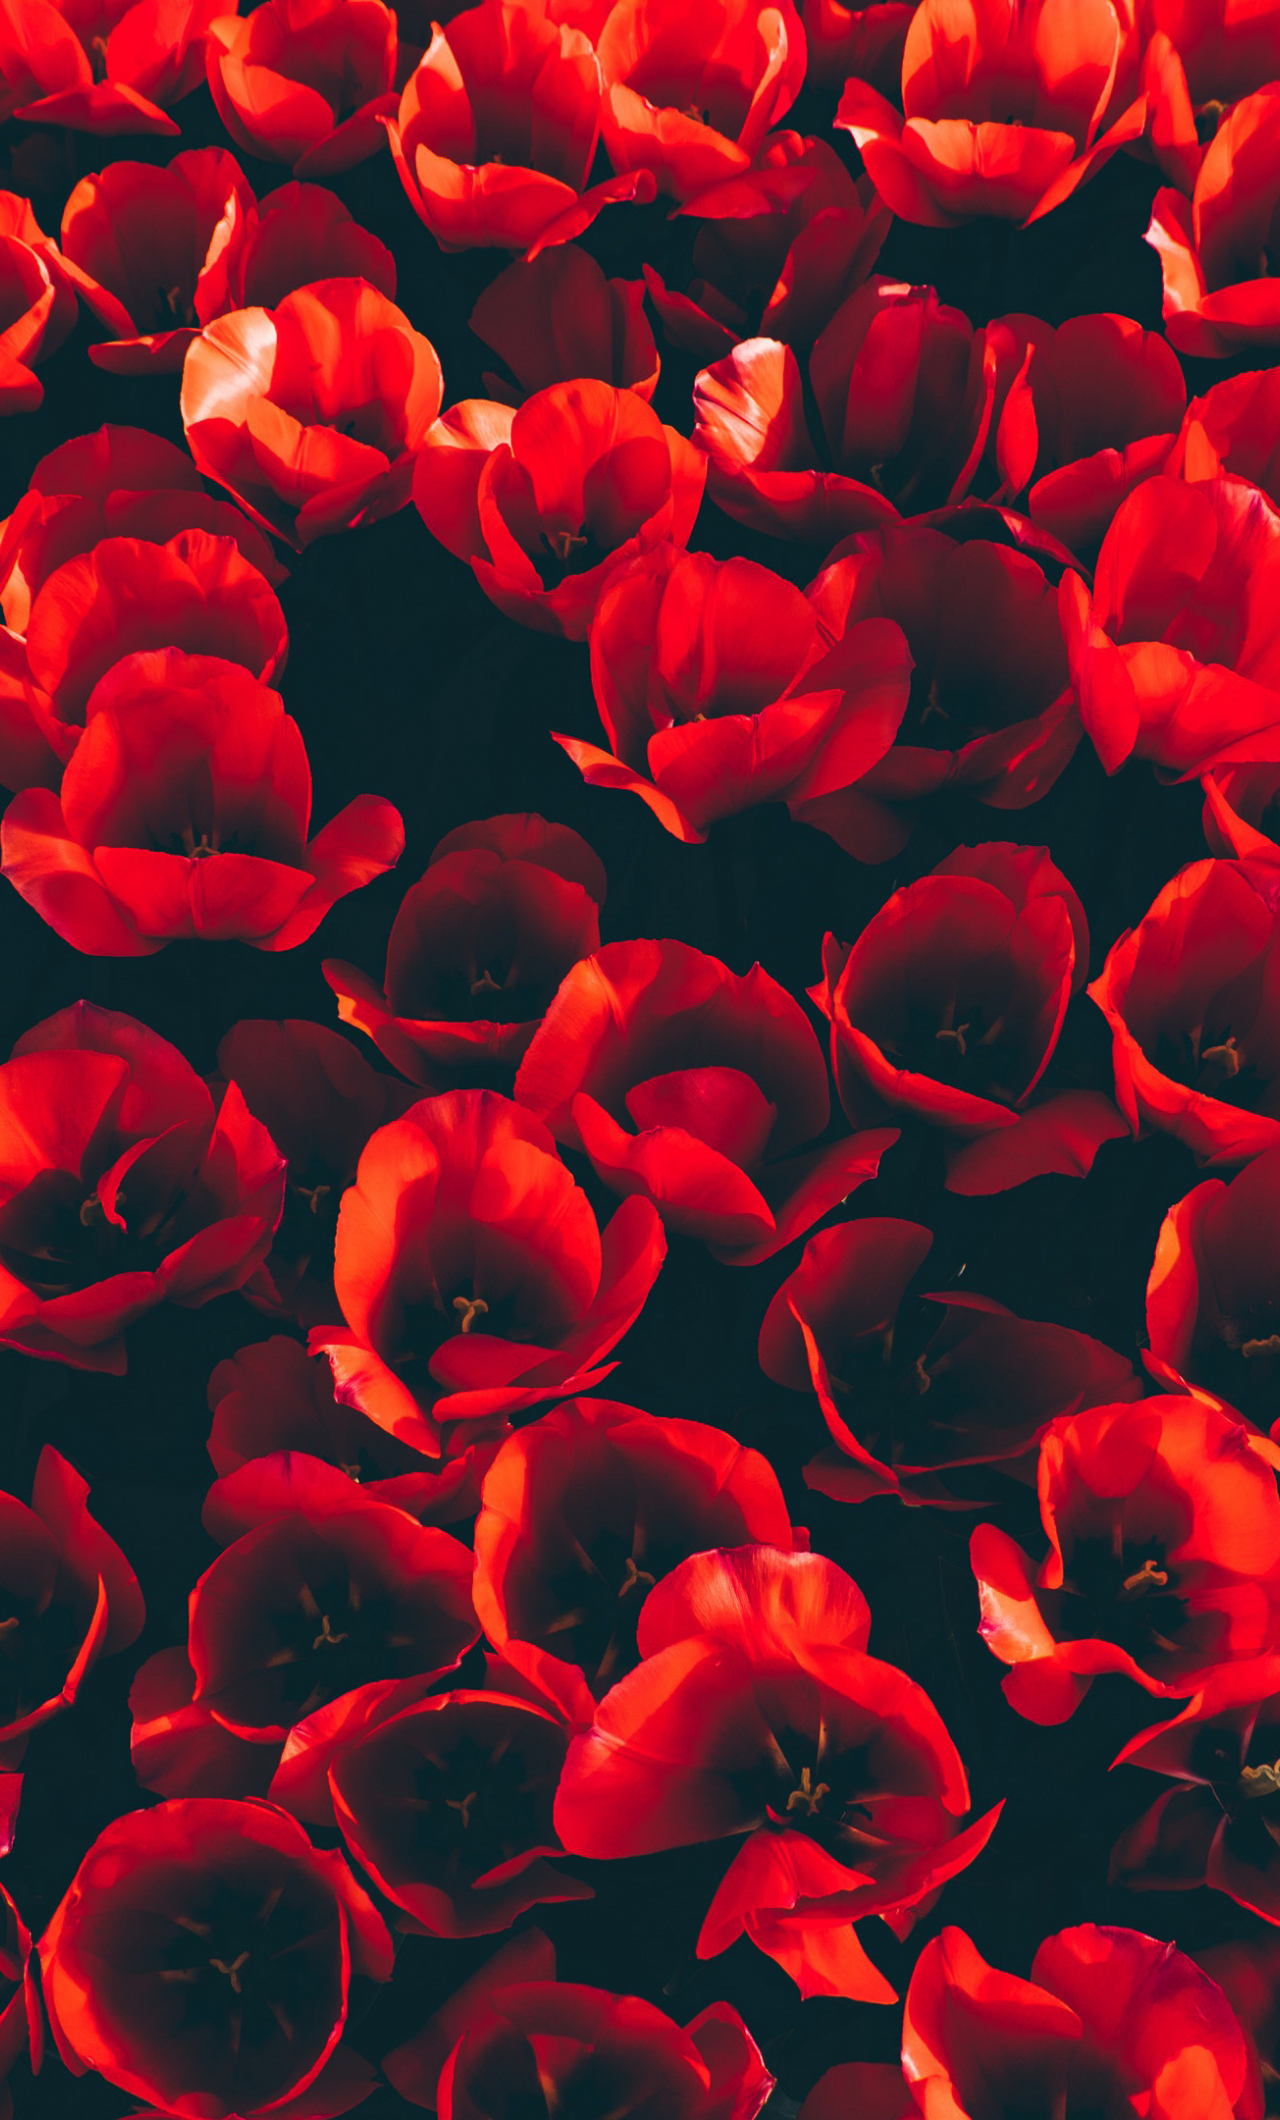 1280x2120 Download decoration, red tulips, flowers wallpaper, iphone 6 plus, hd image, background, 15039